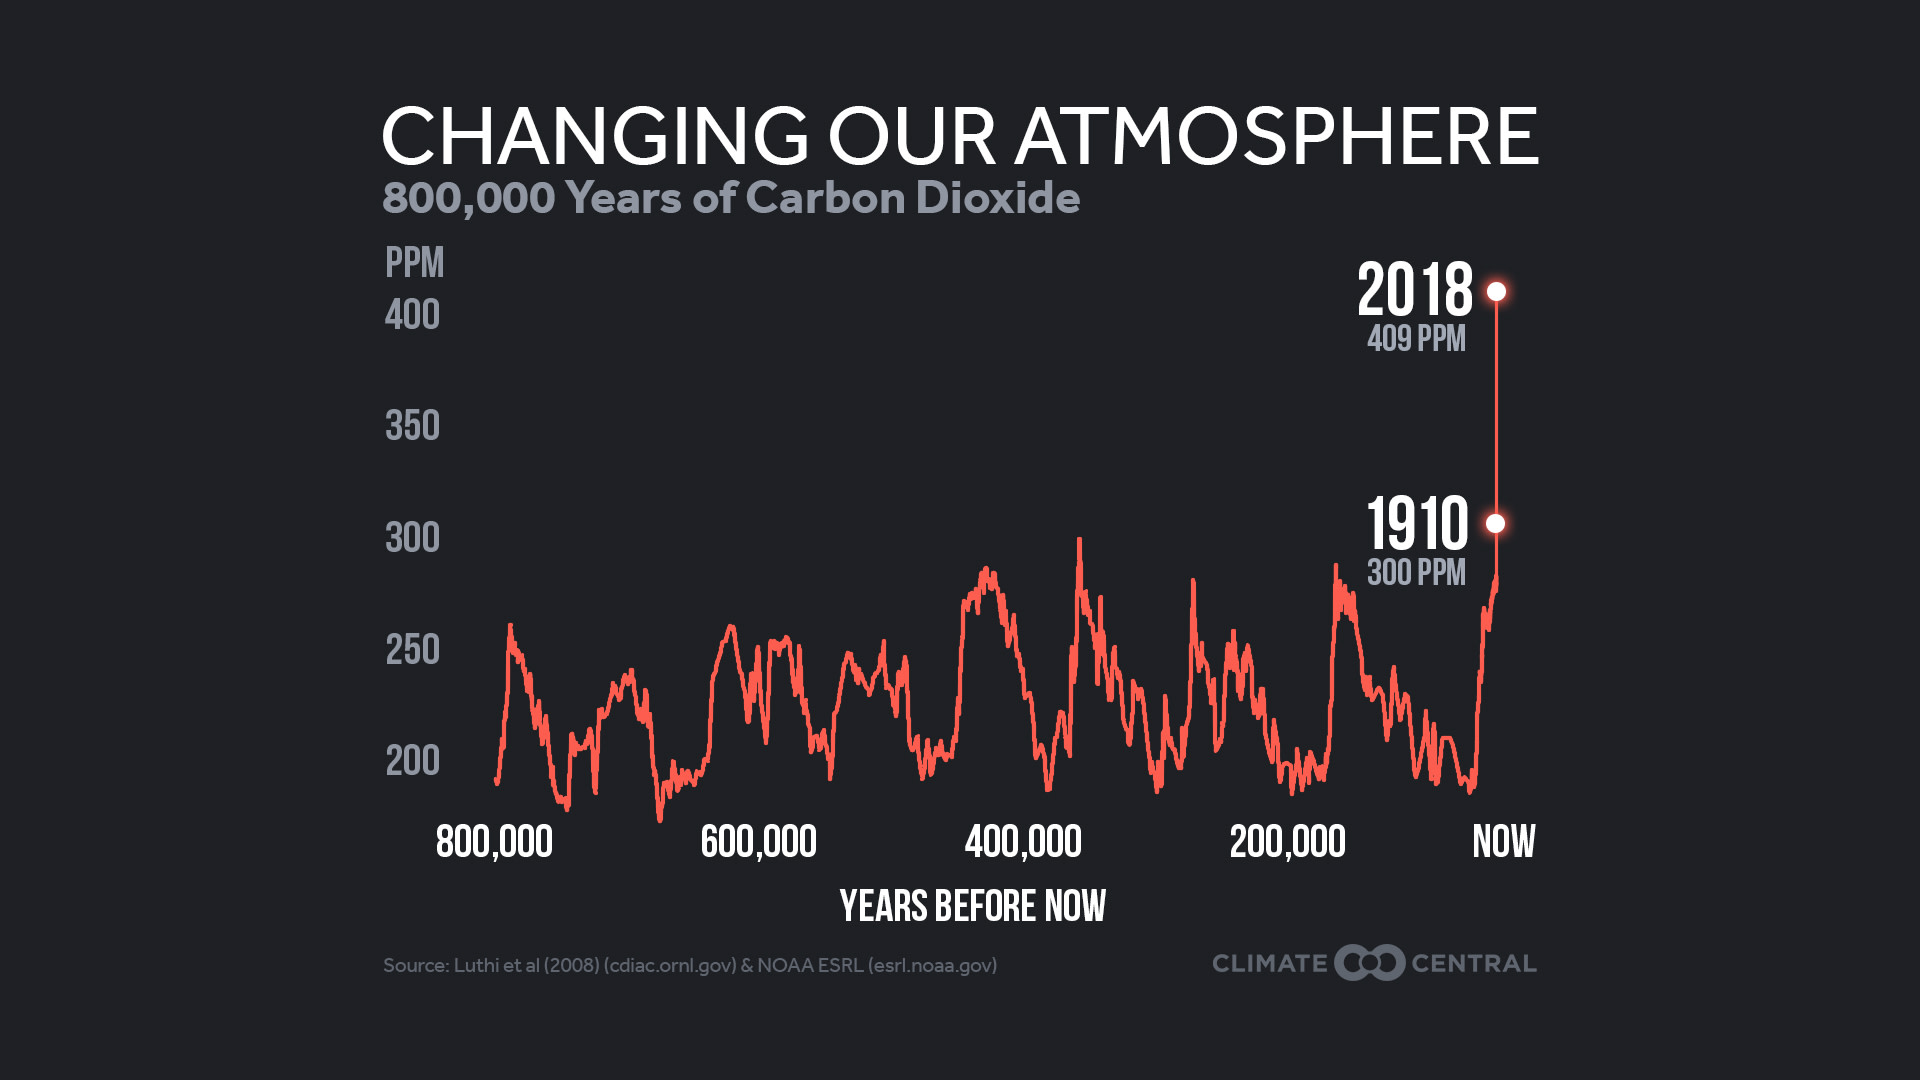 history of CO2